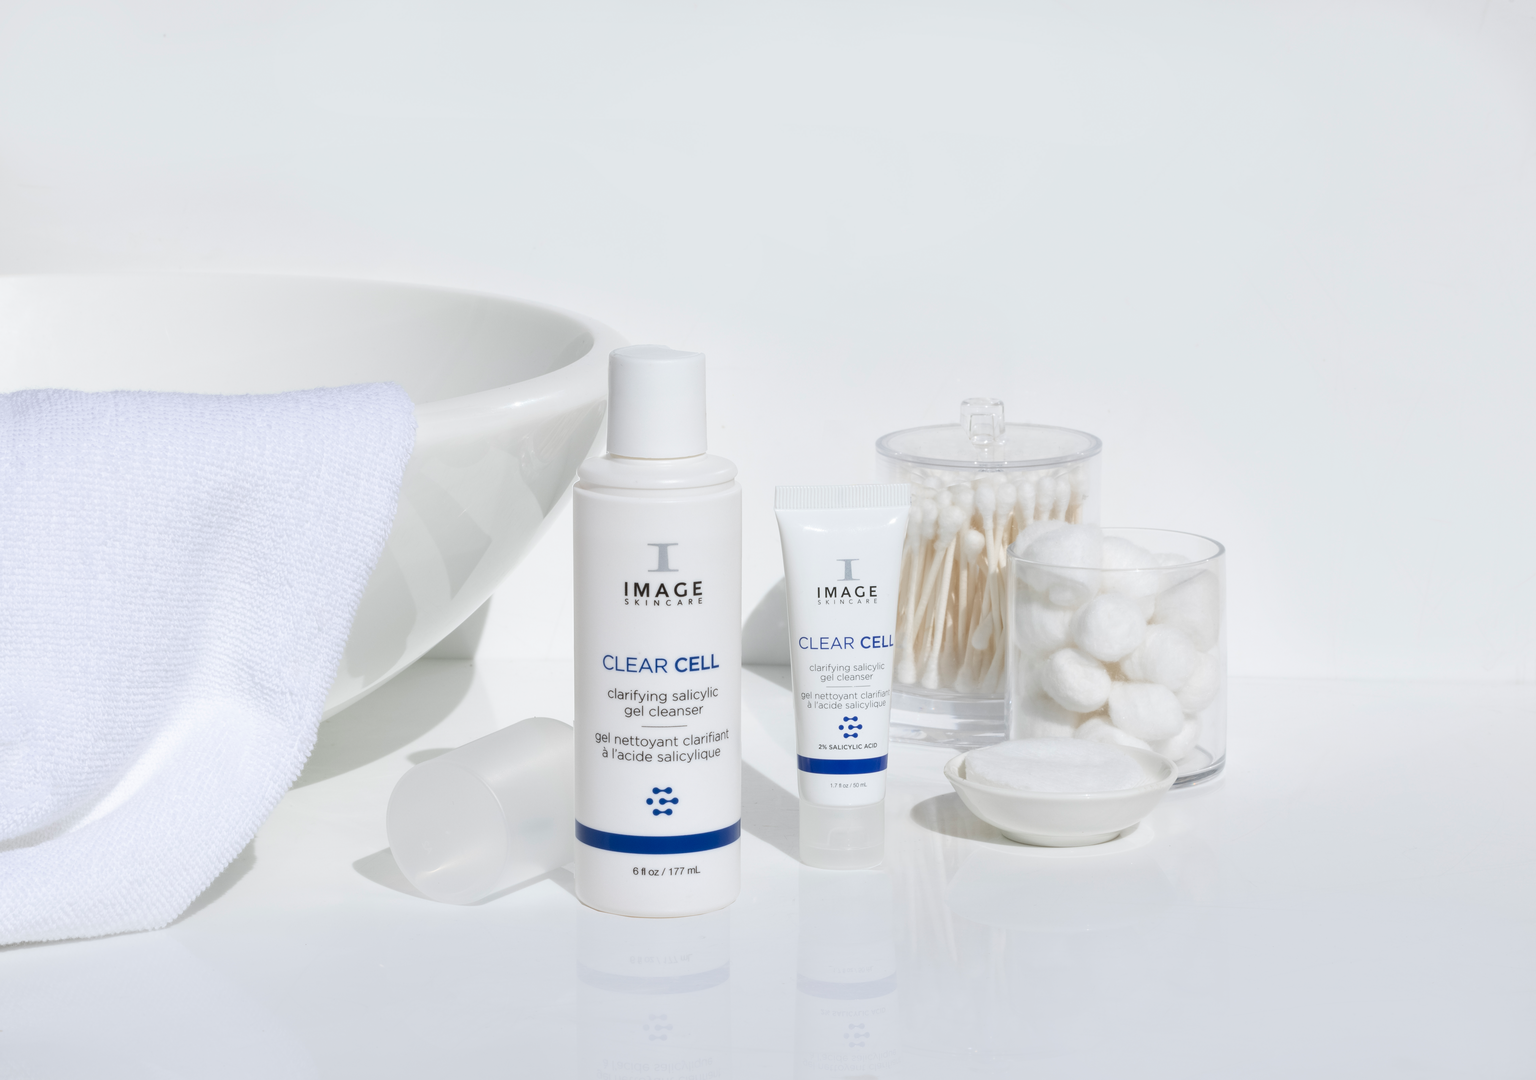 The Collection - CLEAR CELL Salicylic Gel Cleanser